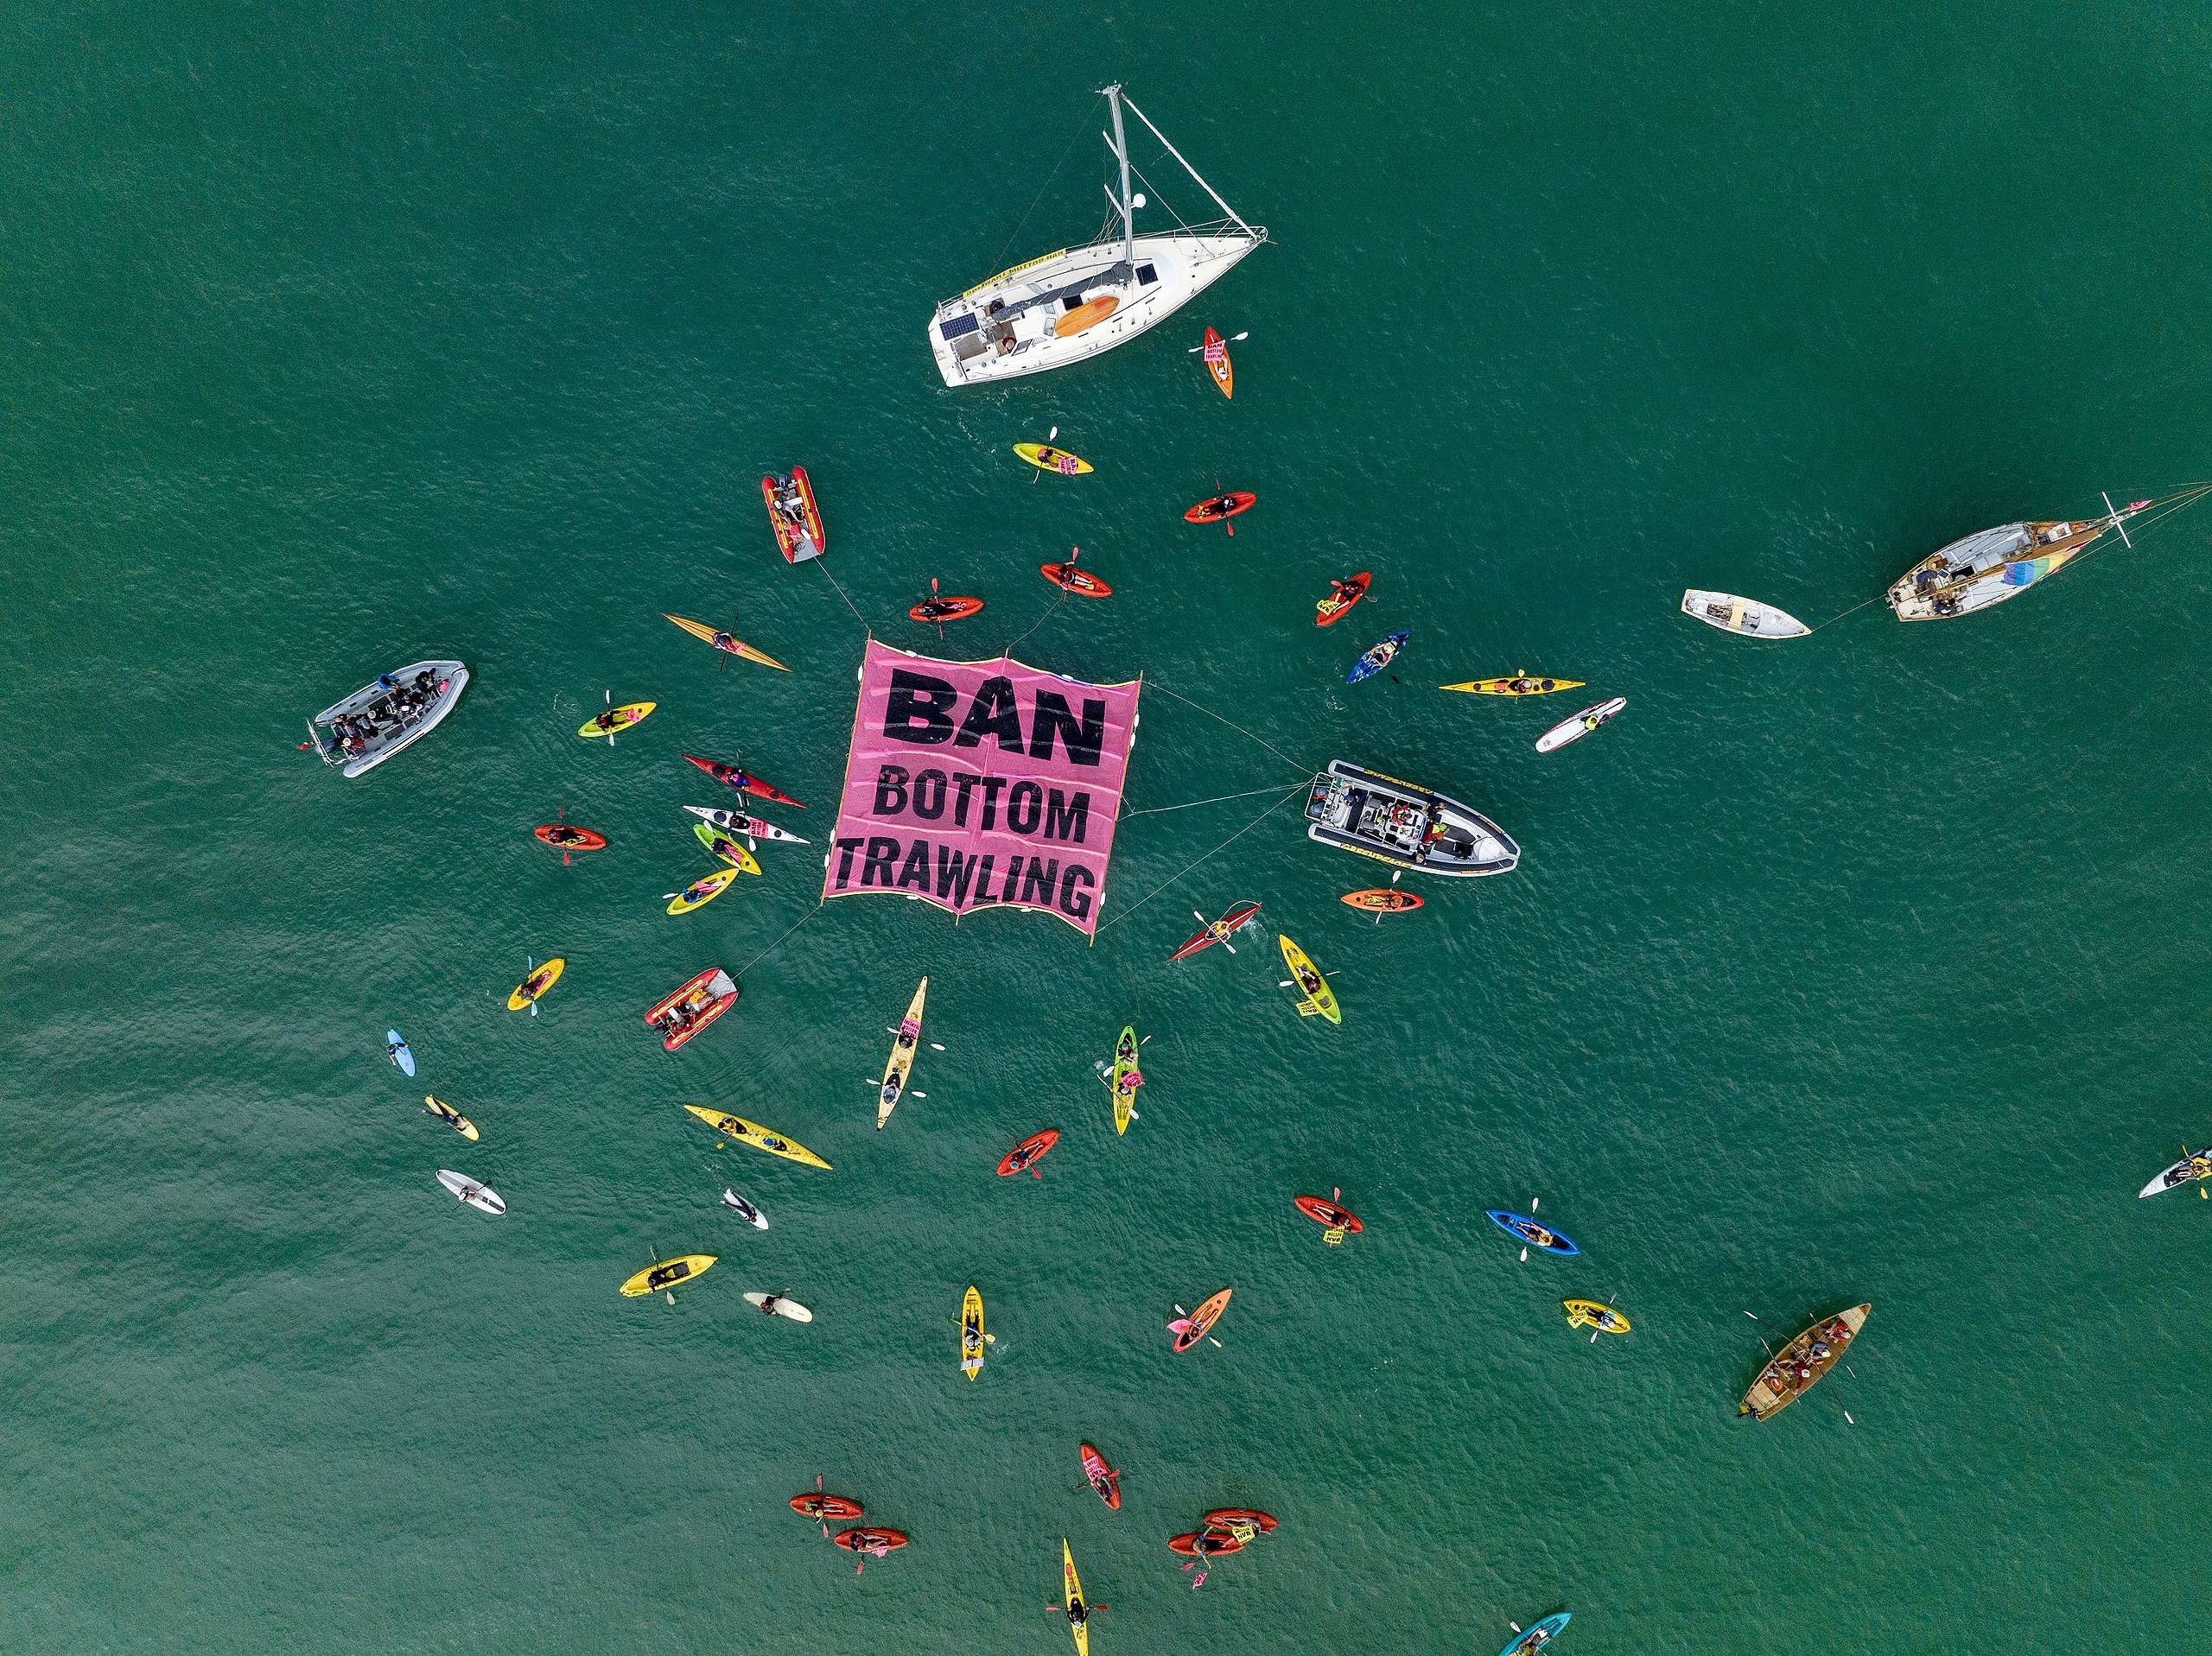 Bottom trawling banner at Mission Bay in Auckland. Drone photography by Echo Valley